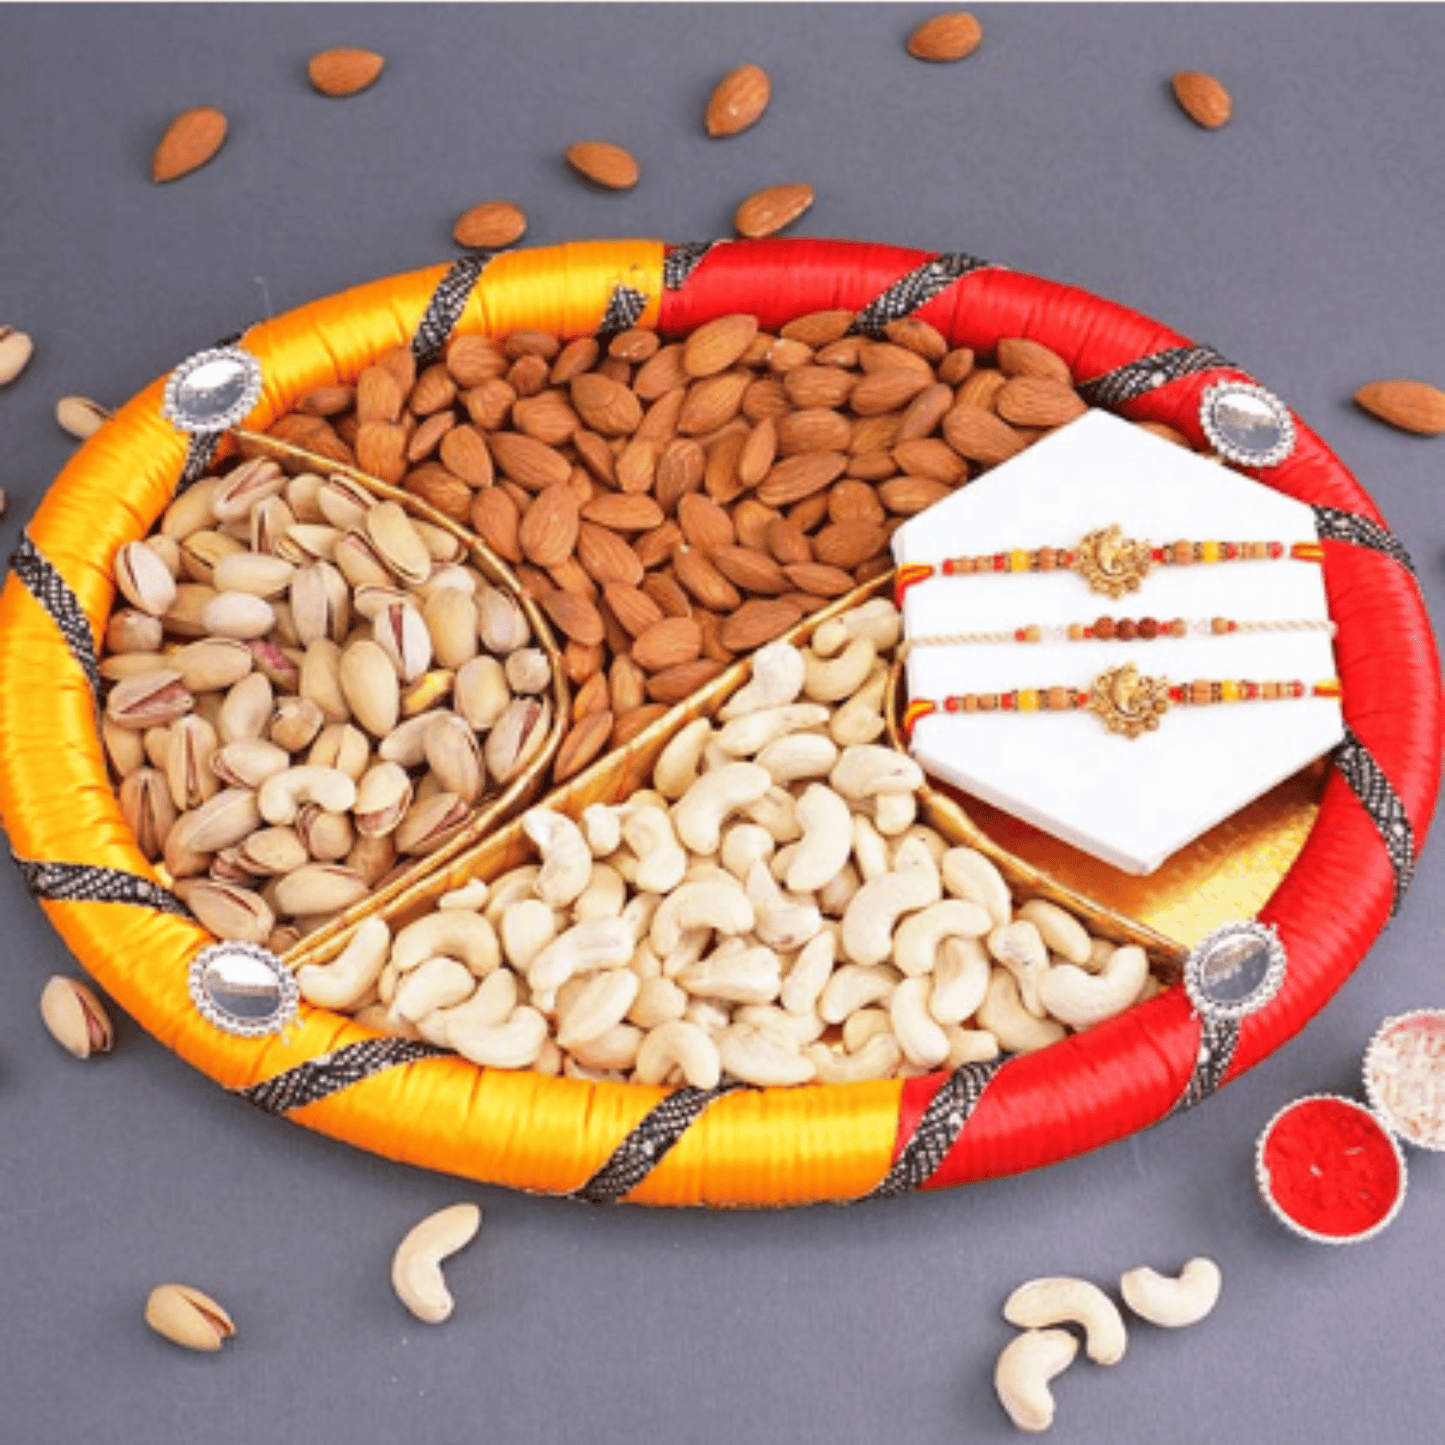 Triad of Love: 500gms Dryfruits with 3 Rakhis